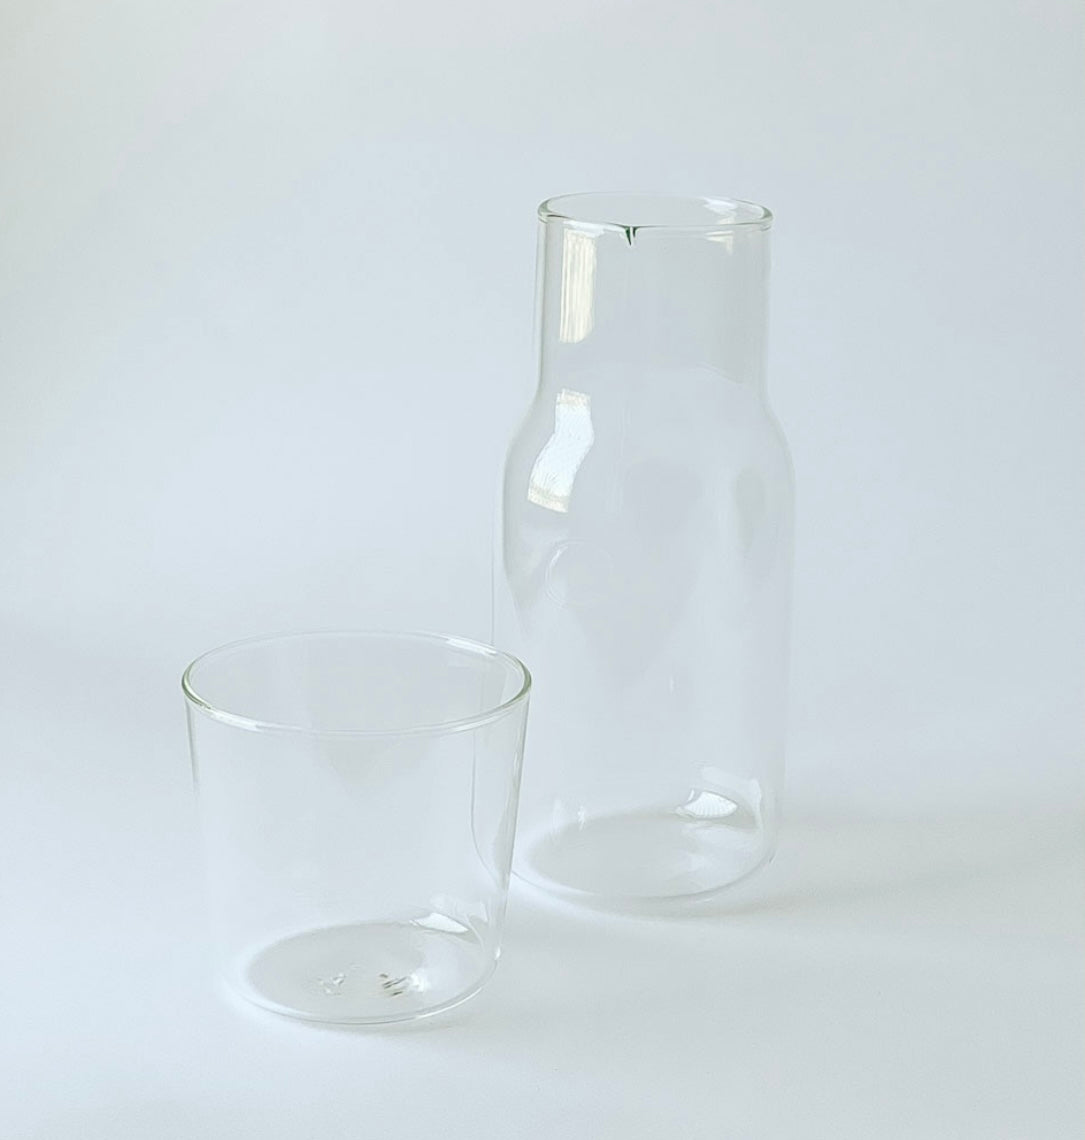 Carafe &amp; tumbler set available in clear glass